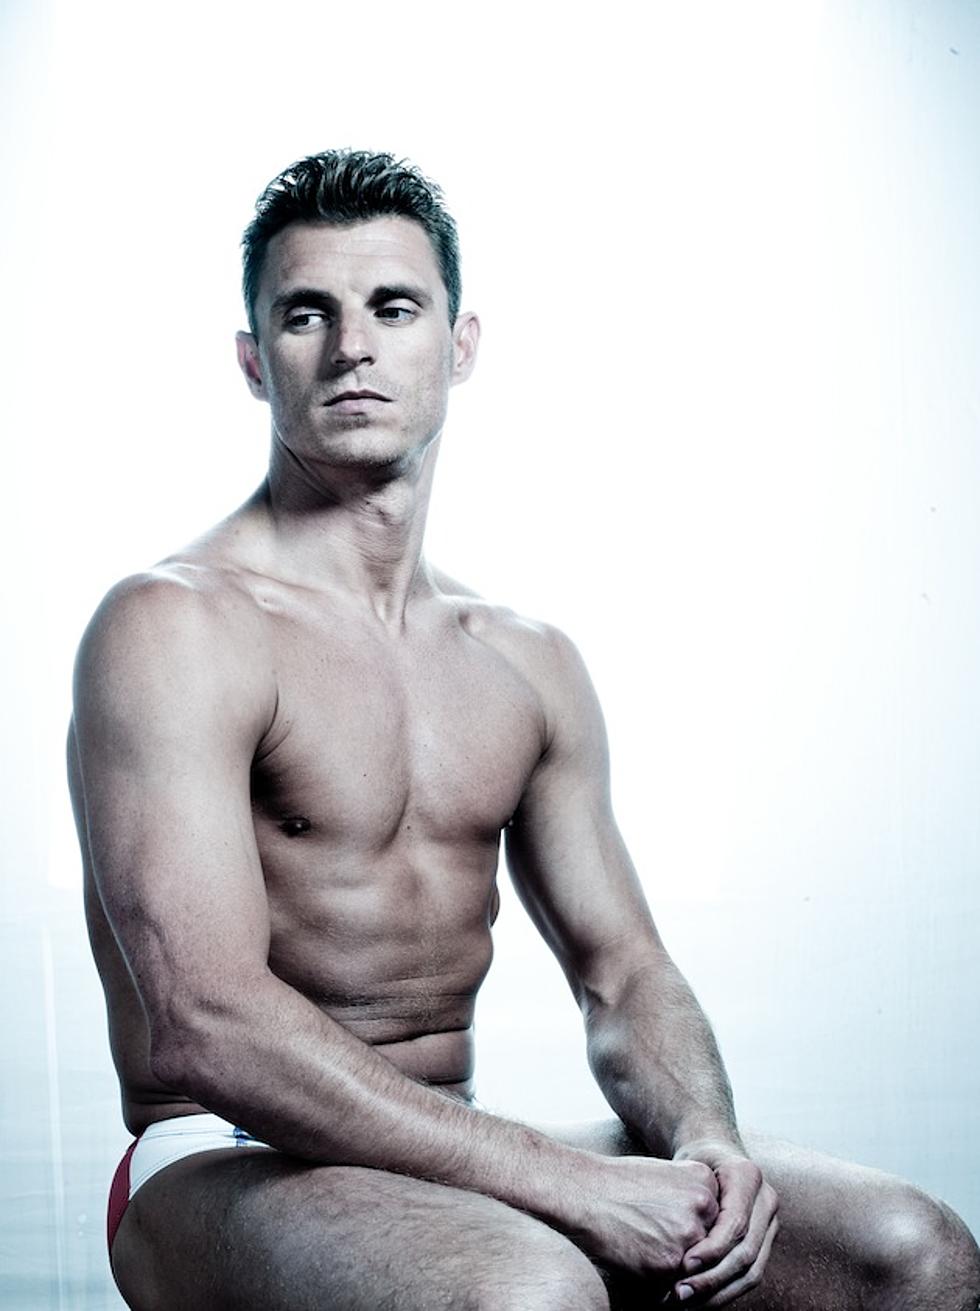 Diver Troy Dumais Finally Earns a Spot on the Podium – Hunk of the Day